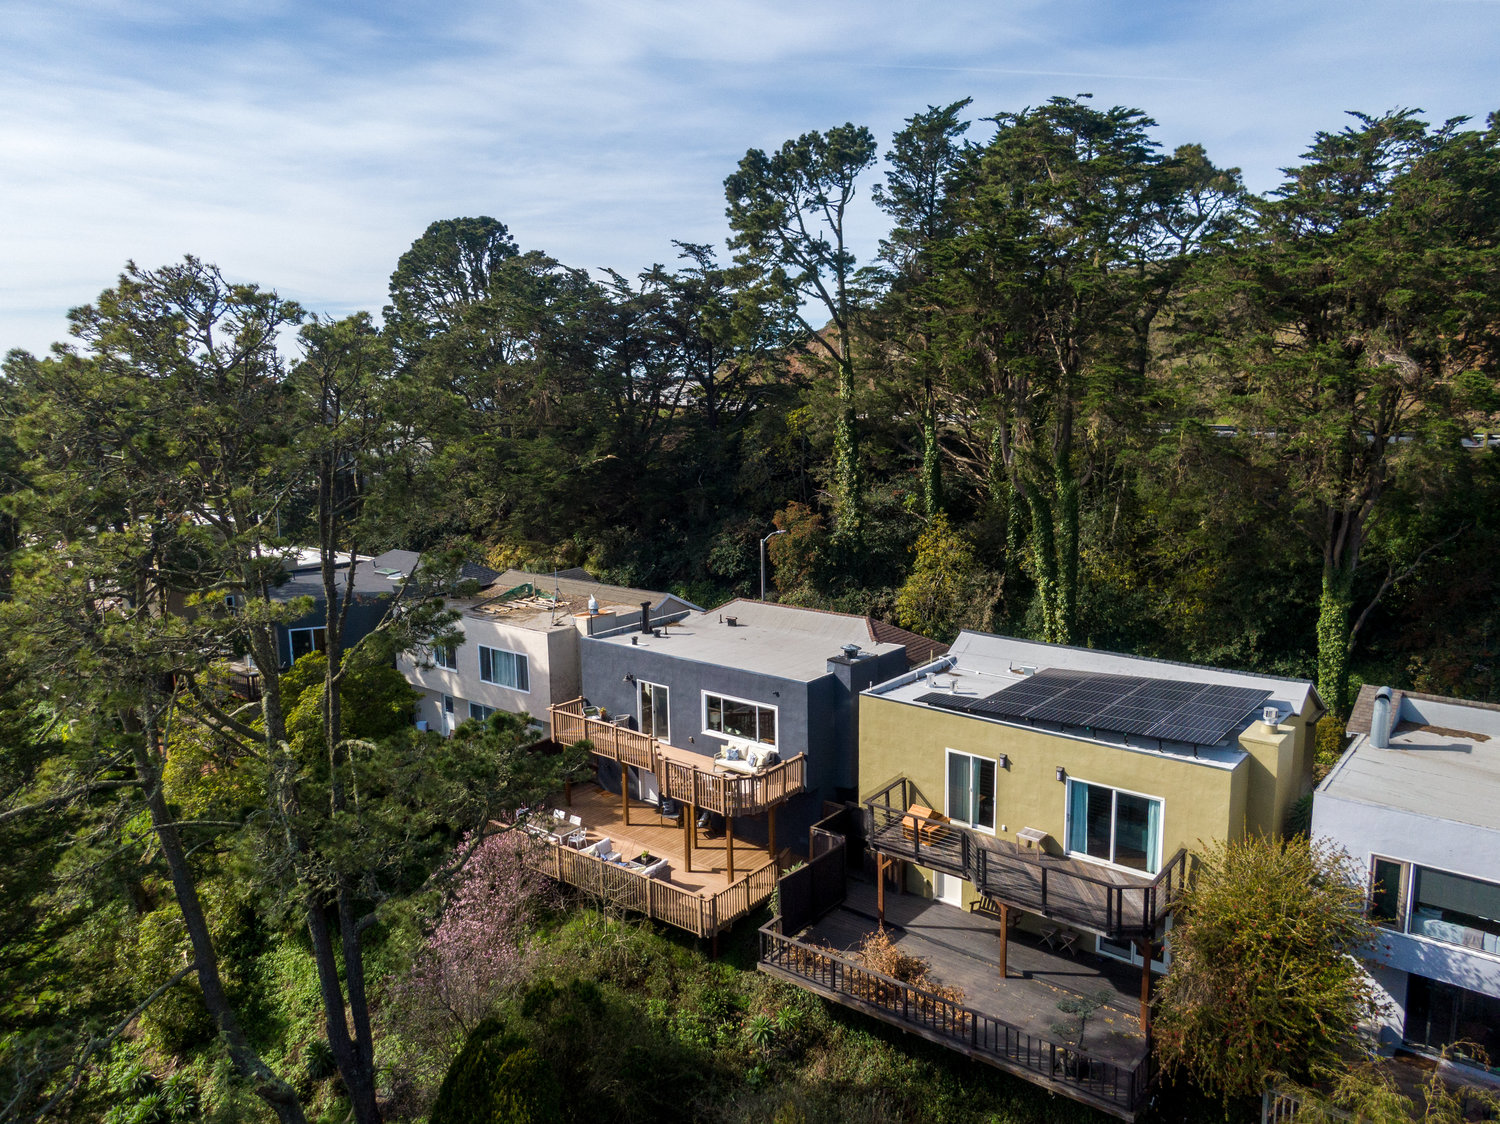 Property Photo: Side aerial view of 156 Midcrest, showing the home surrounded by trees 